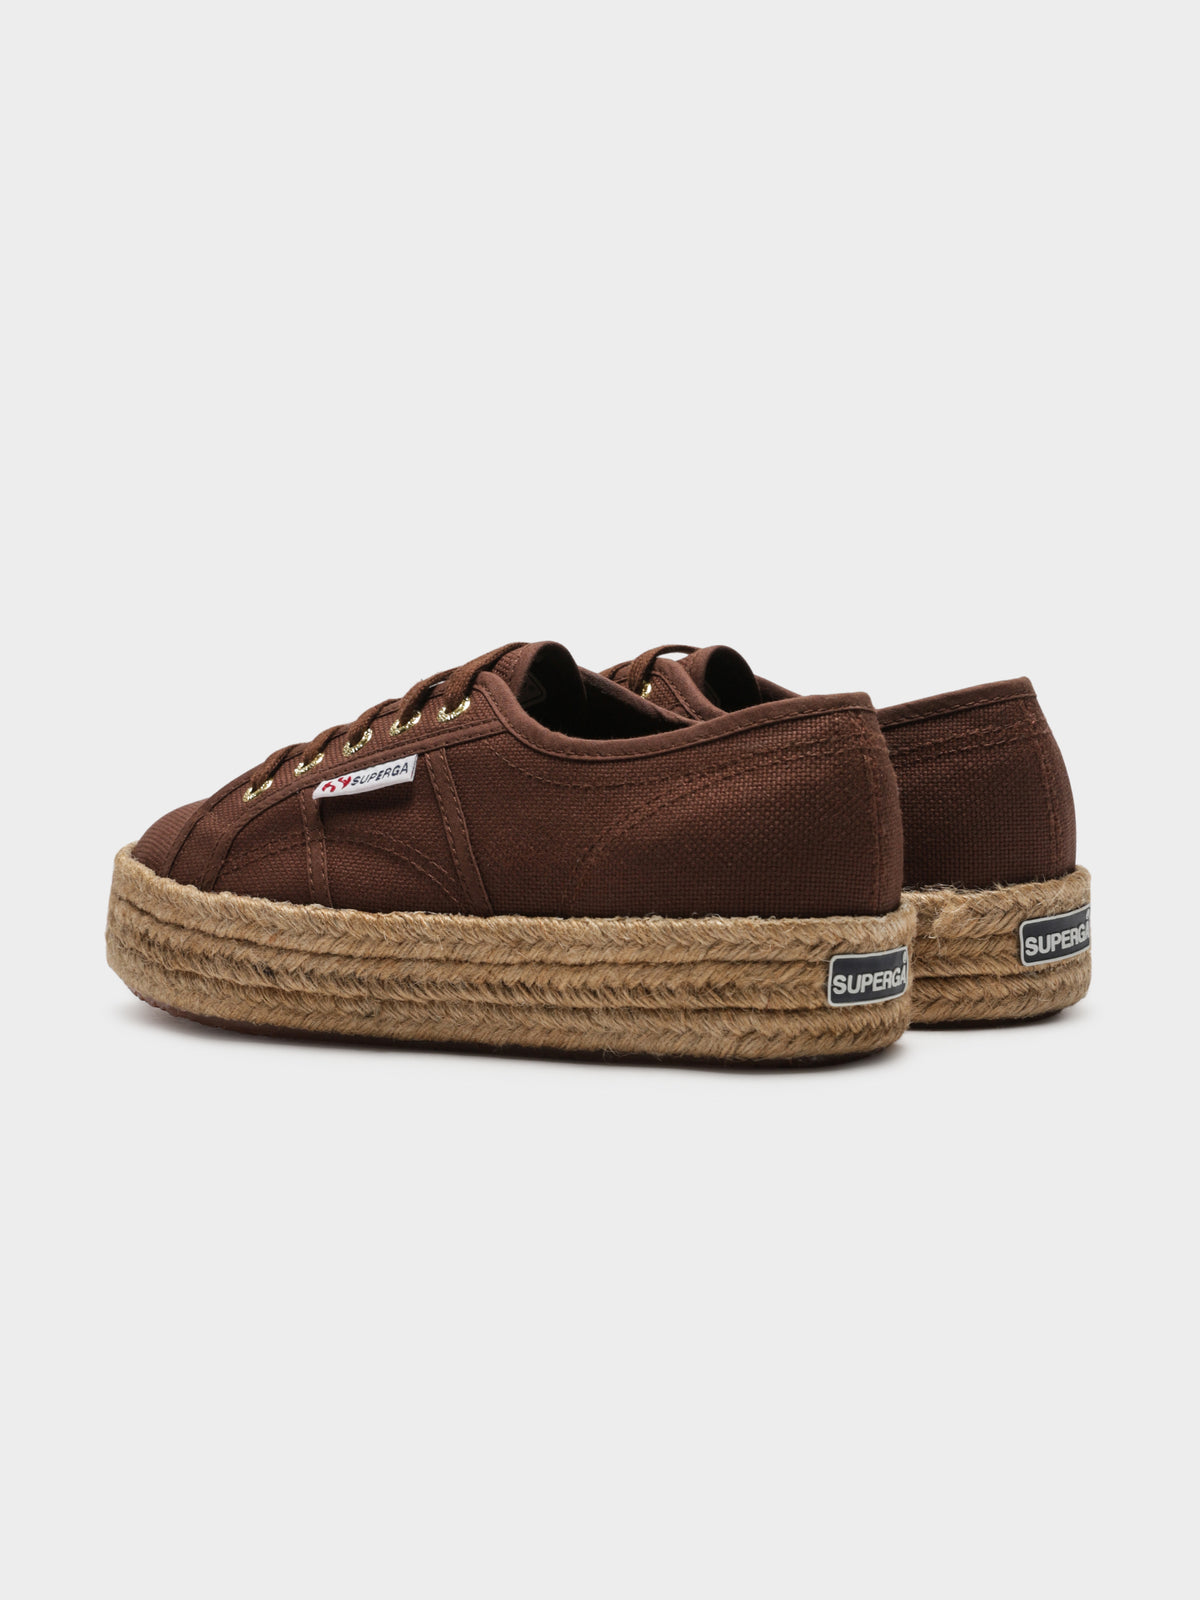 2730 Cotropew Sneakers in Brown Castagna